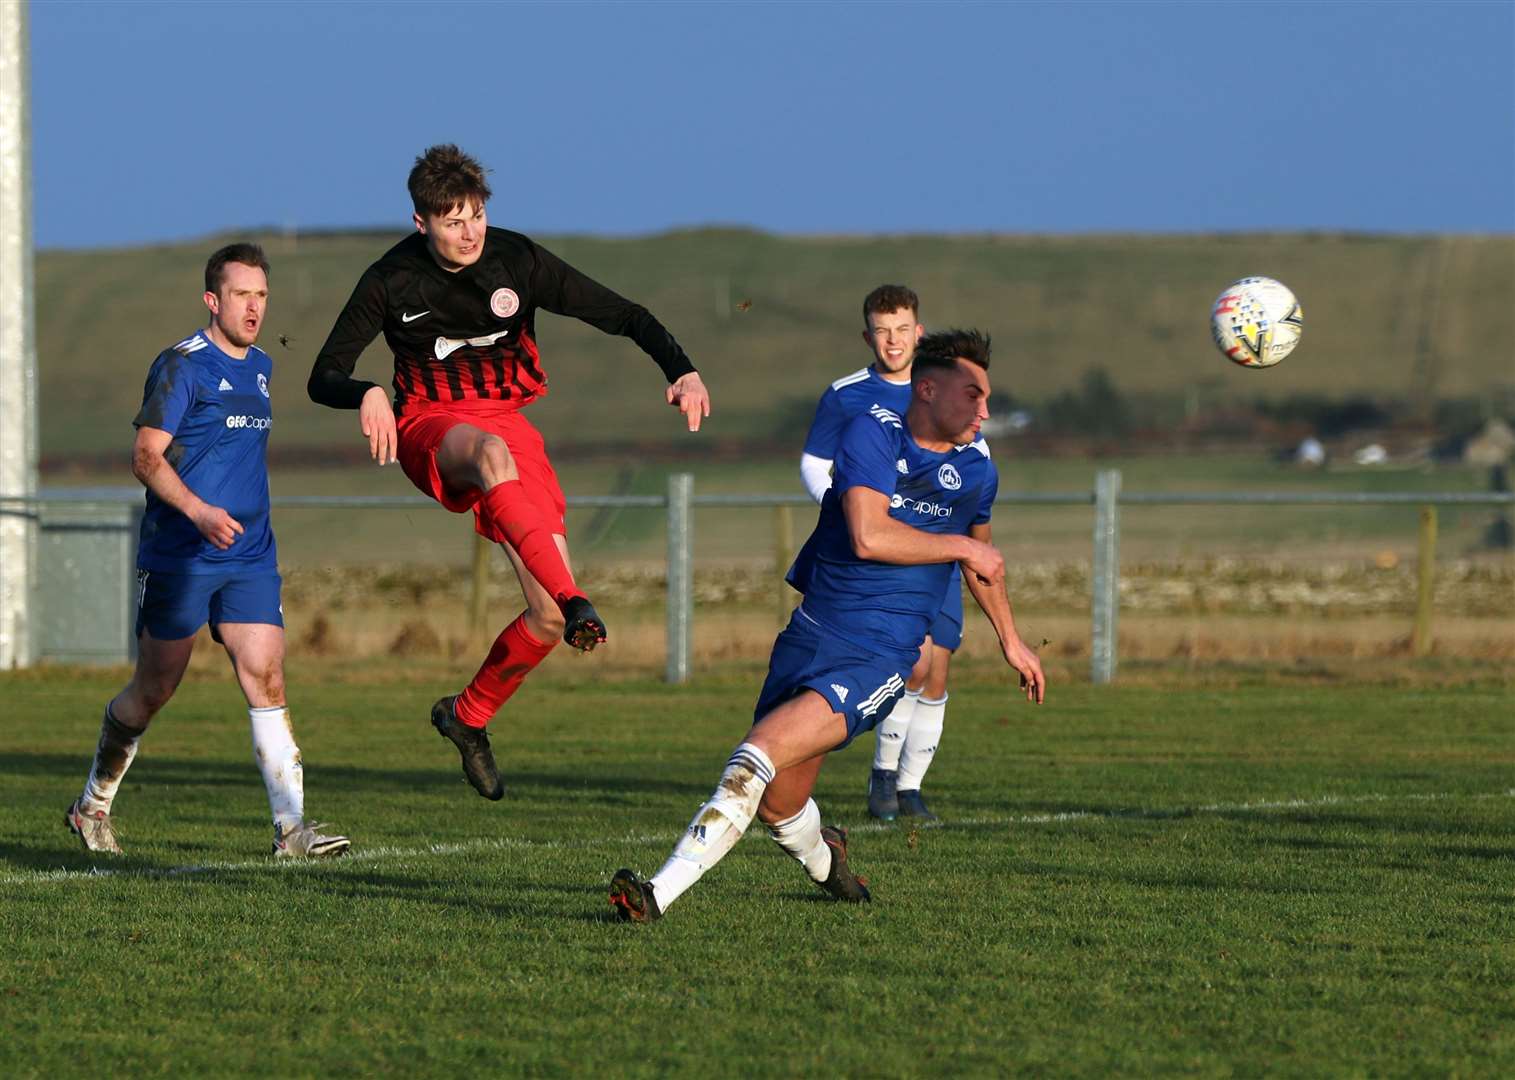 James Mackintosh sends a volley towards goal during the Anglers' 4-2 victory in the league match against Invergordon at Morrison Park last month. Picture: James Gunn